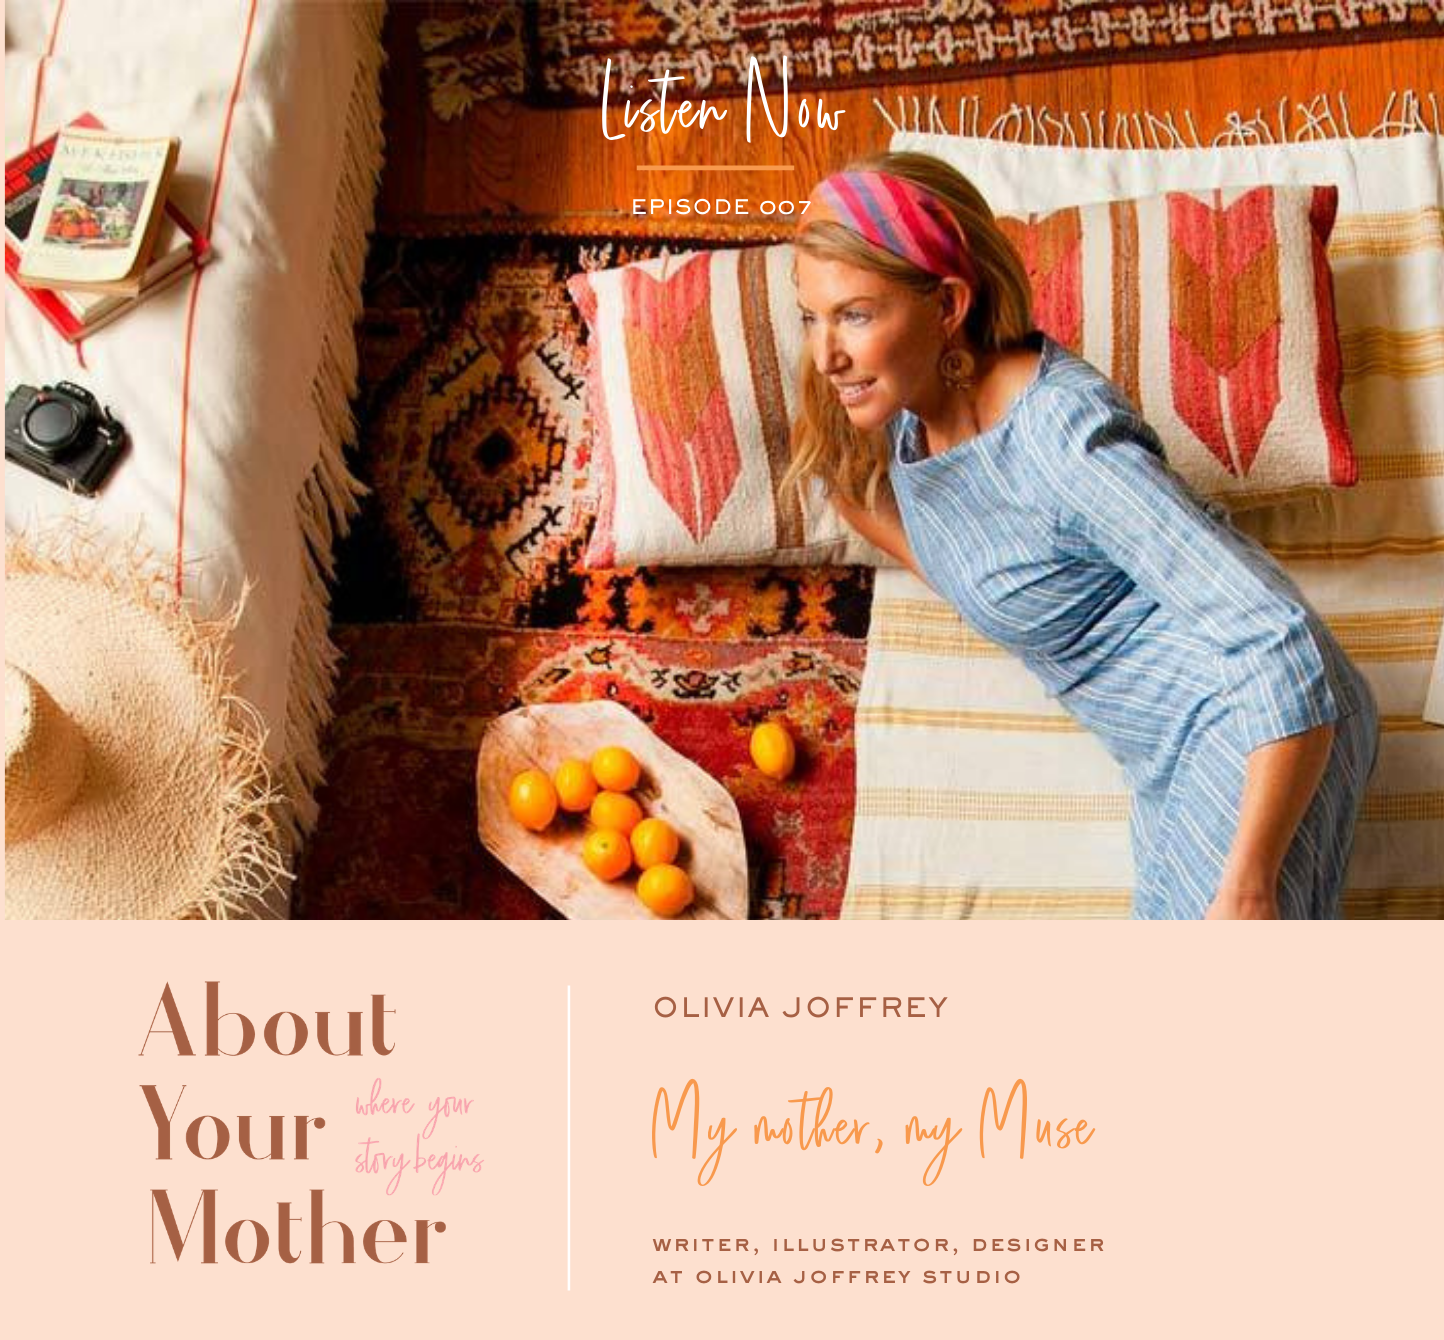 007 My Eponymous Fashion Line As A Love Letter to My Mother | Olivia Joffrey